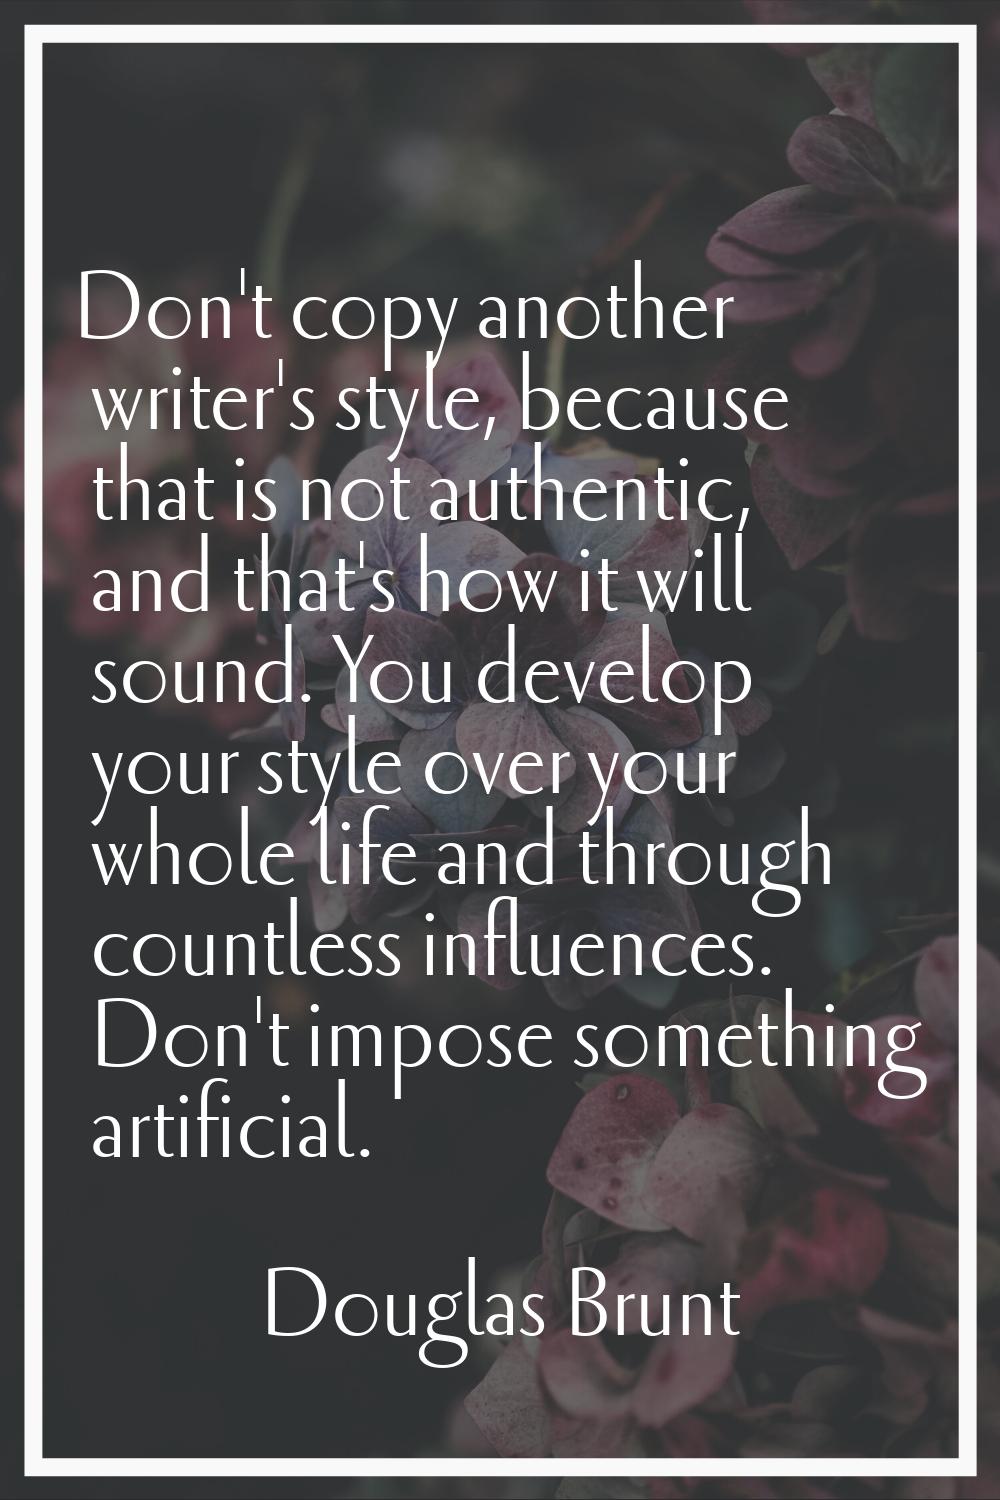 Don't copy another writer's style, because that is not authentic, and that's how it will sound. You